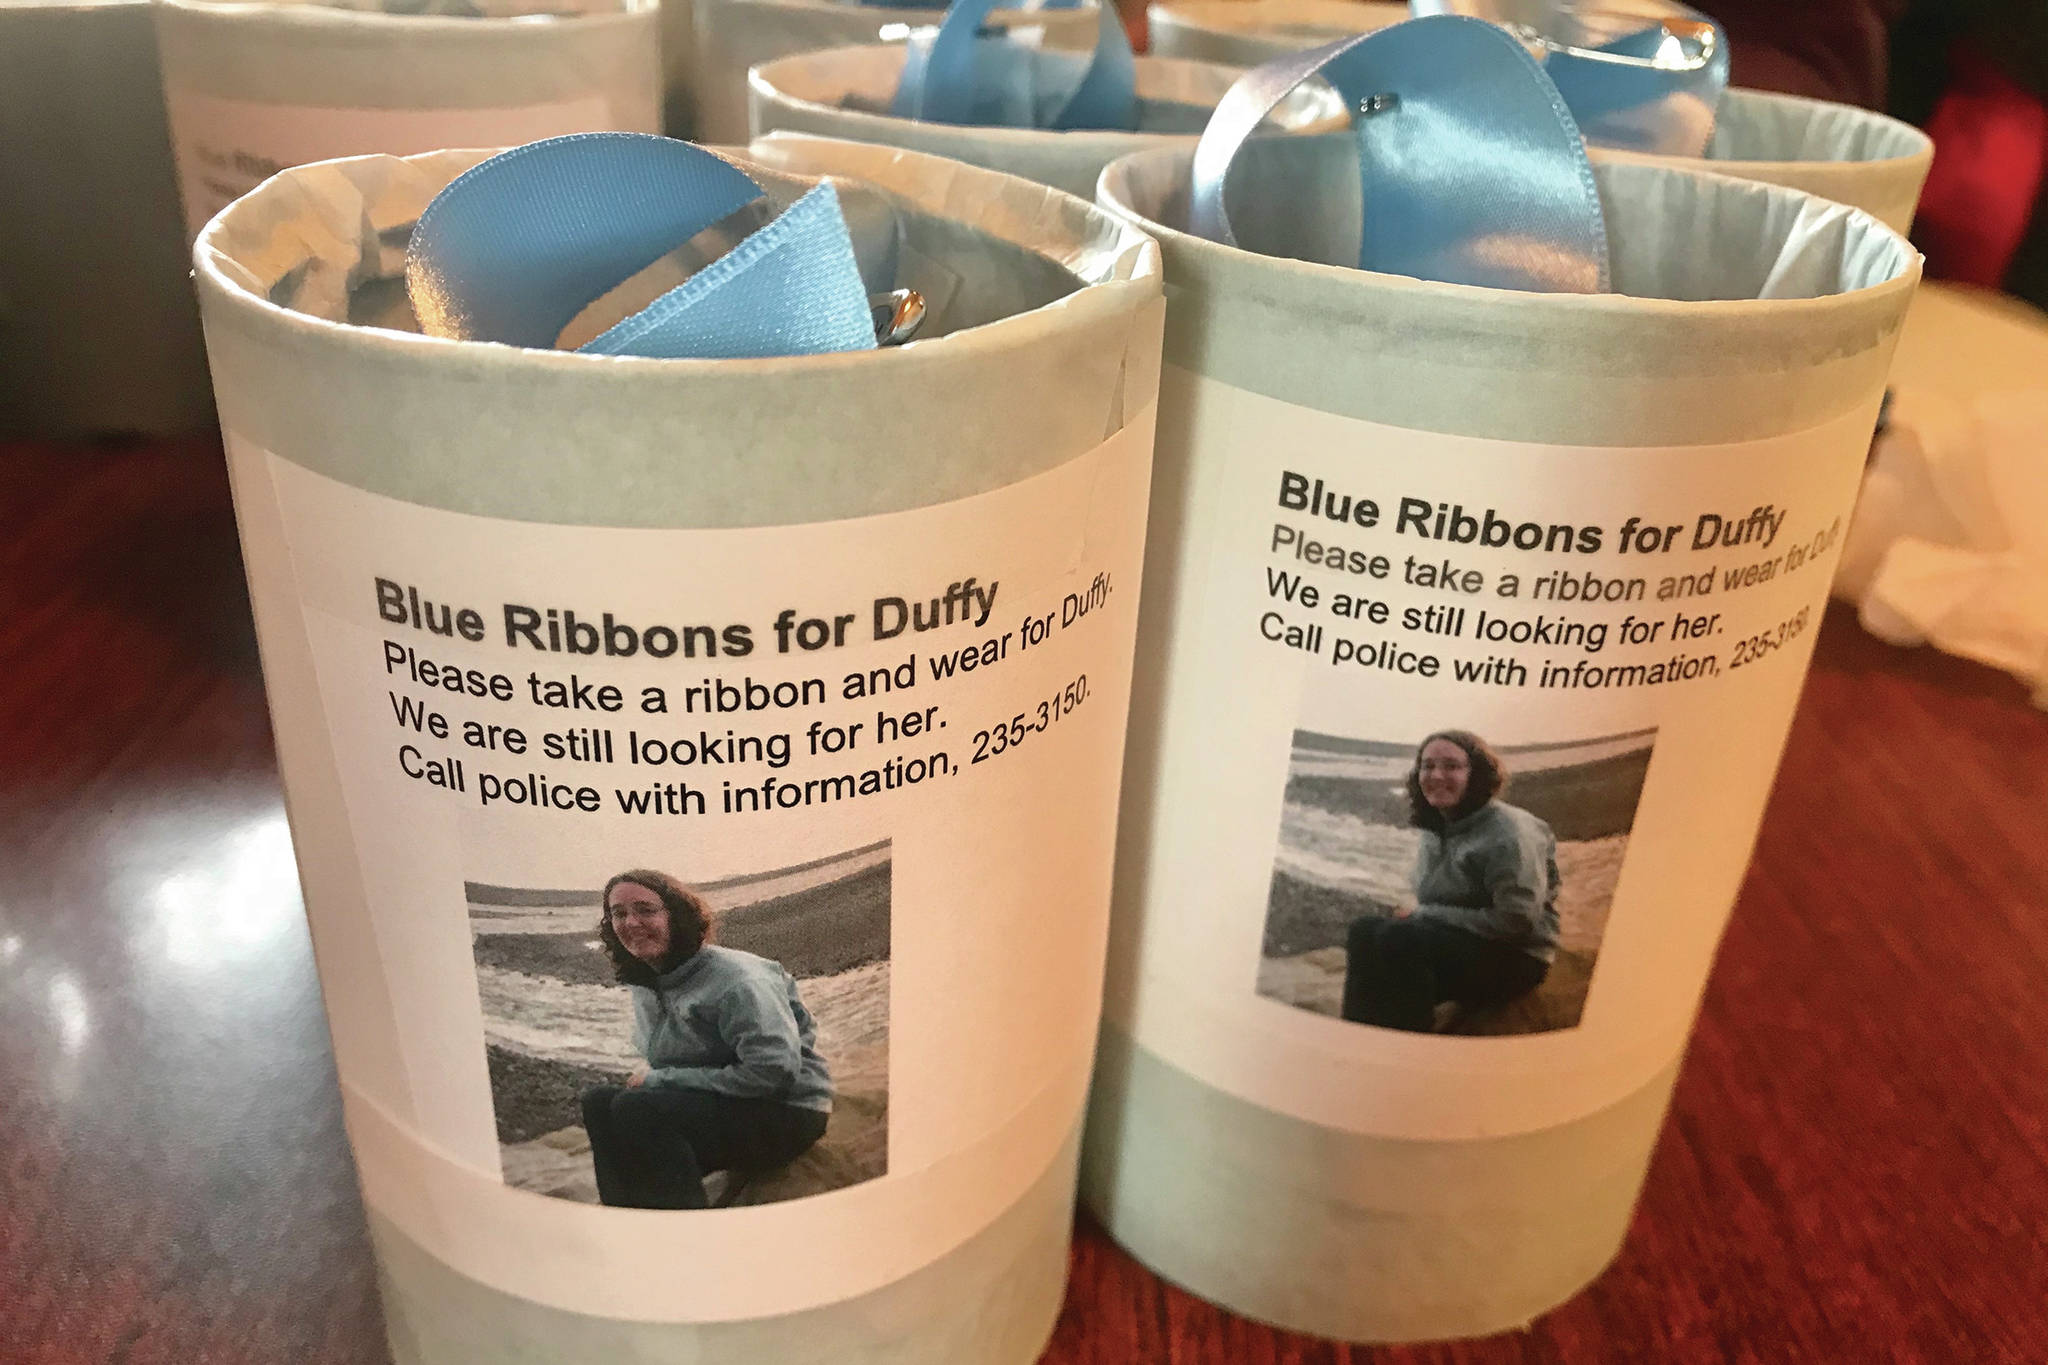 Tins with blue ribbons were placed on Feb. 26, 2020, around Homer, Alaska, for people to wear as part of an awareness campaign for a missing Homer woman, Anesha “Duffy” Murnane, missing since Oct. 17, 2019. (Photo courtesy of Christina Whiting)